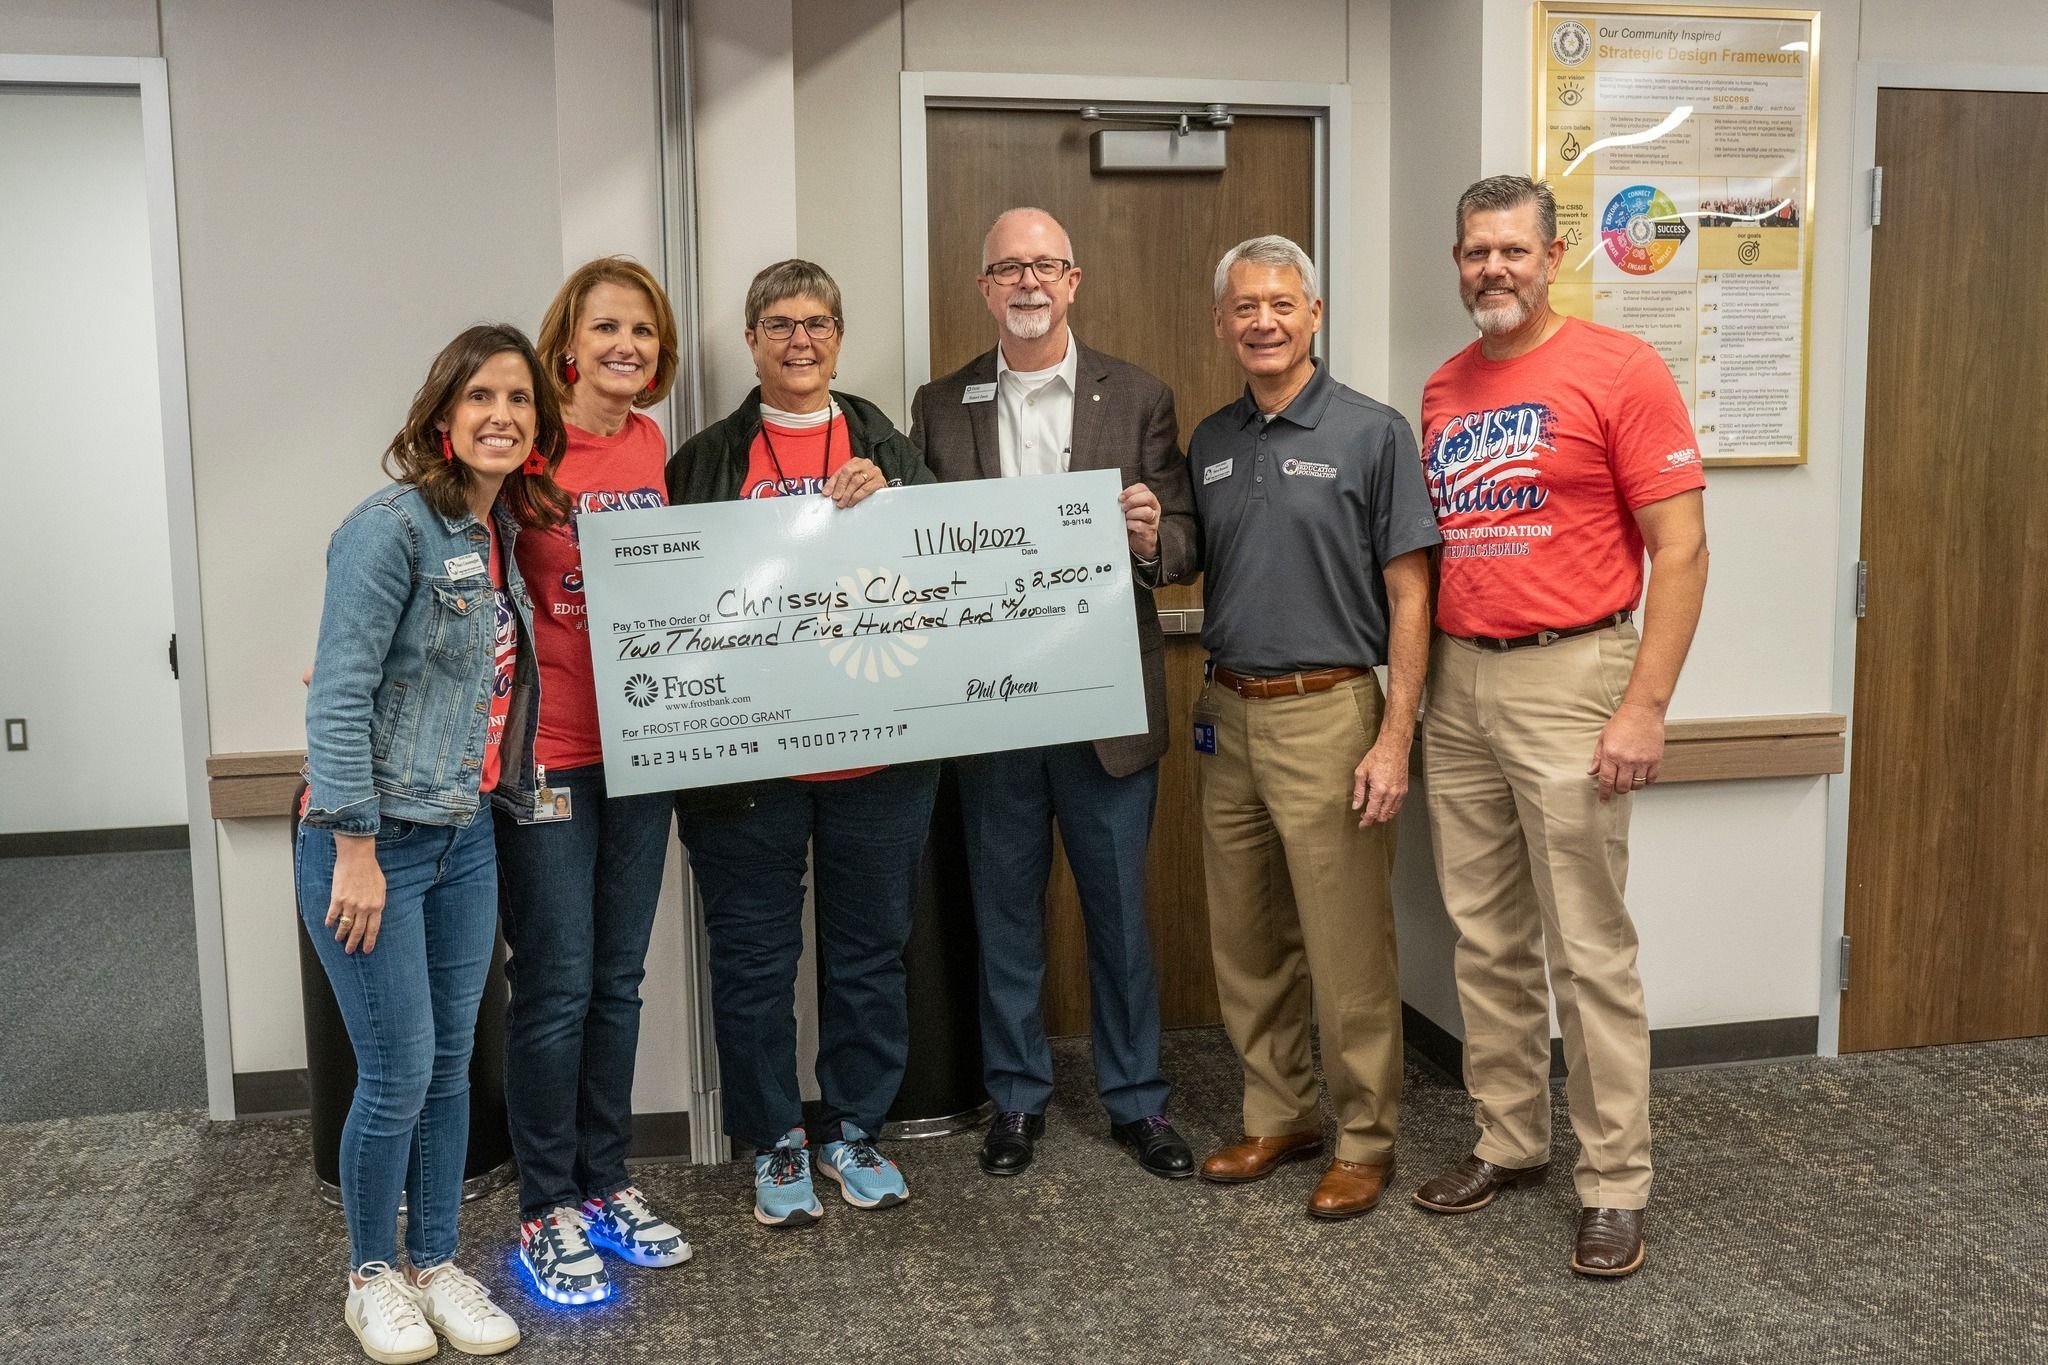 The Education Foundation receives a grant for Chrissy's Closet from Frost